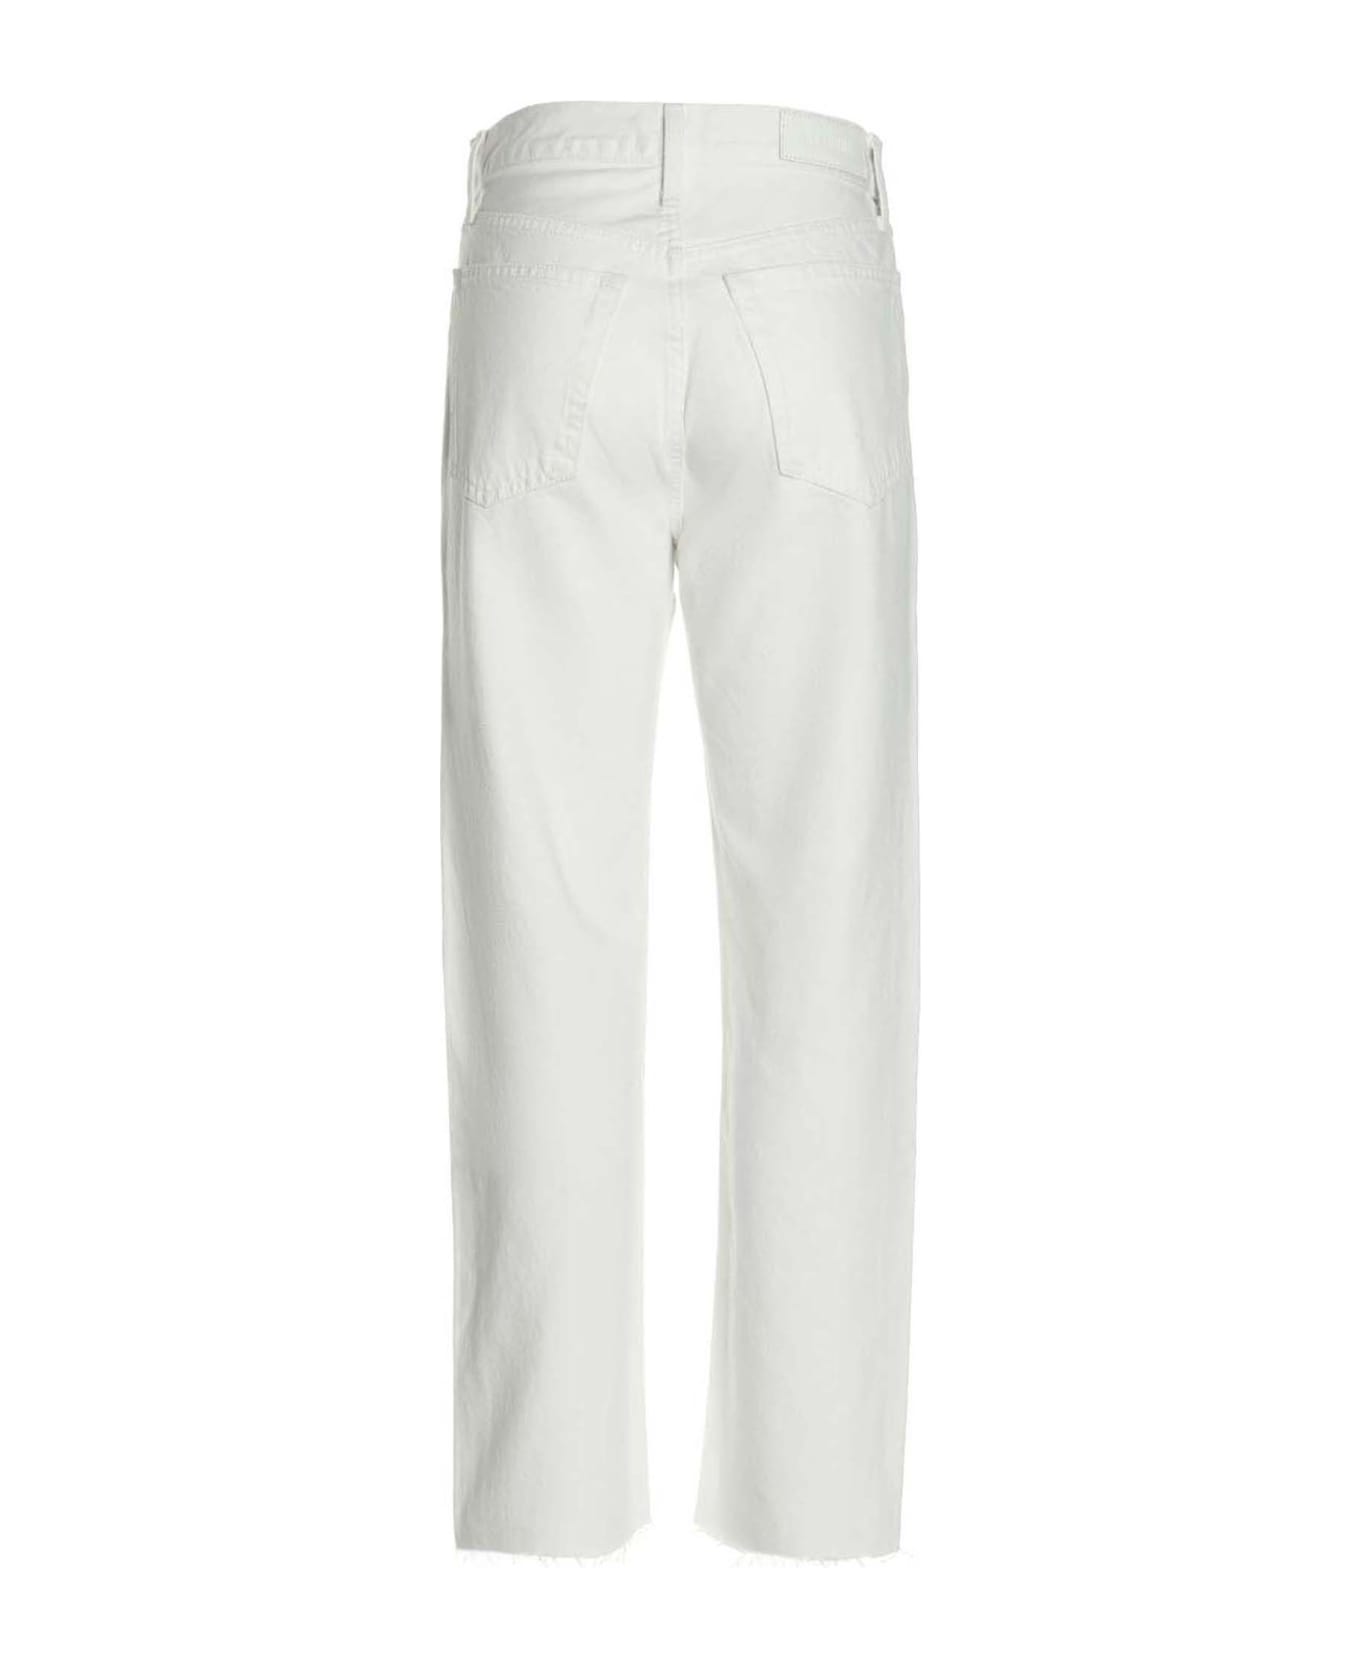 RE/DONE 'stove Pipe' Jeans - White